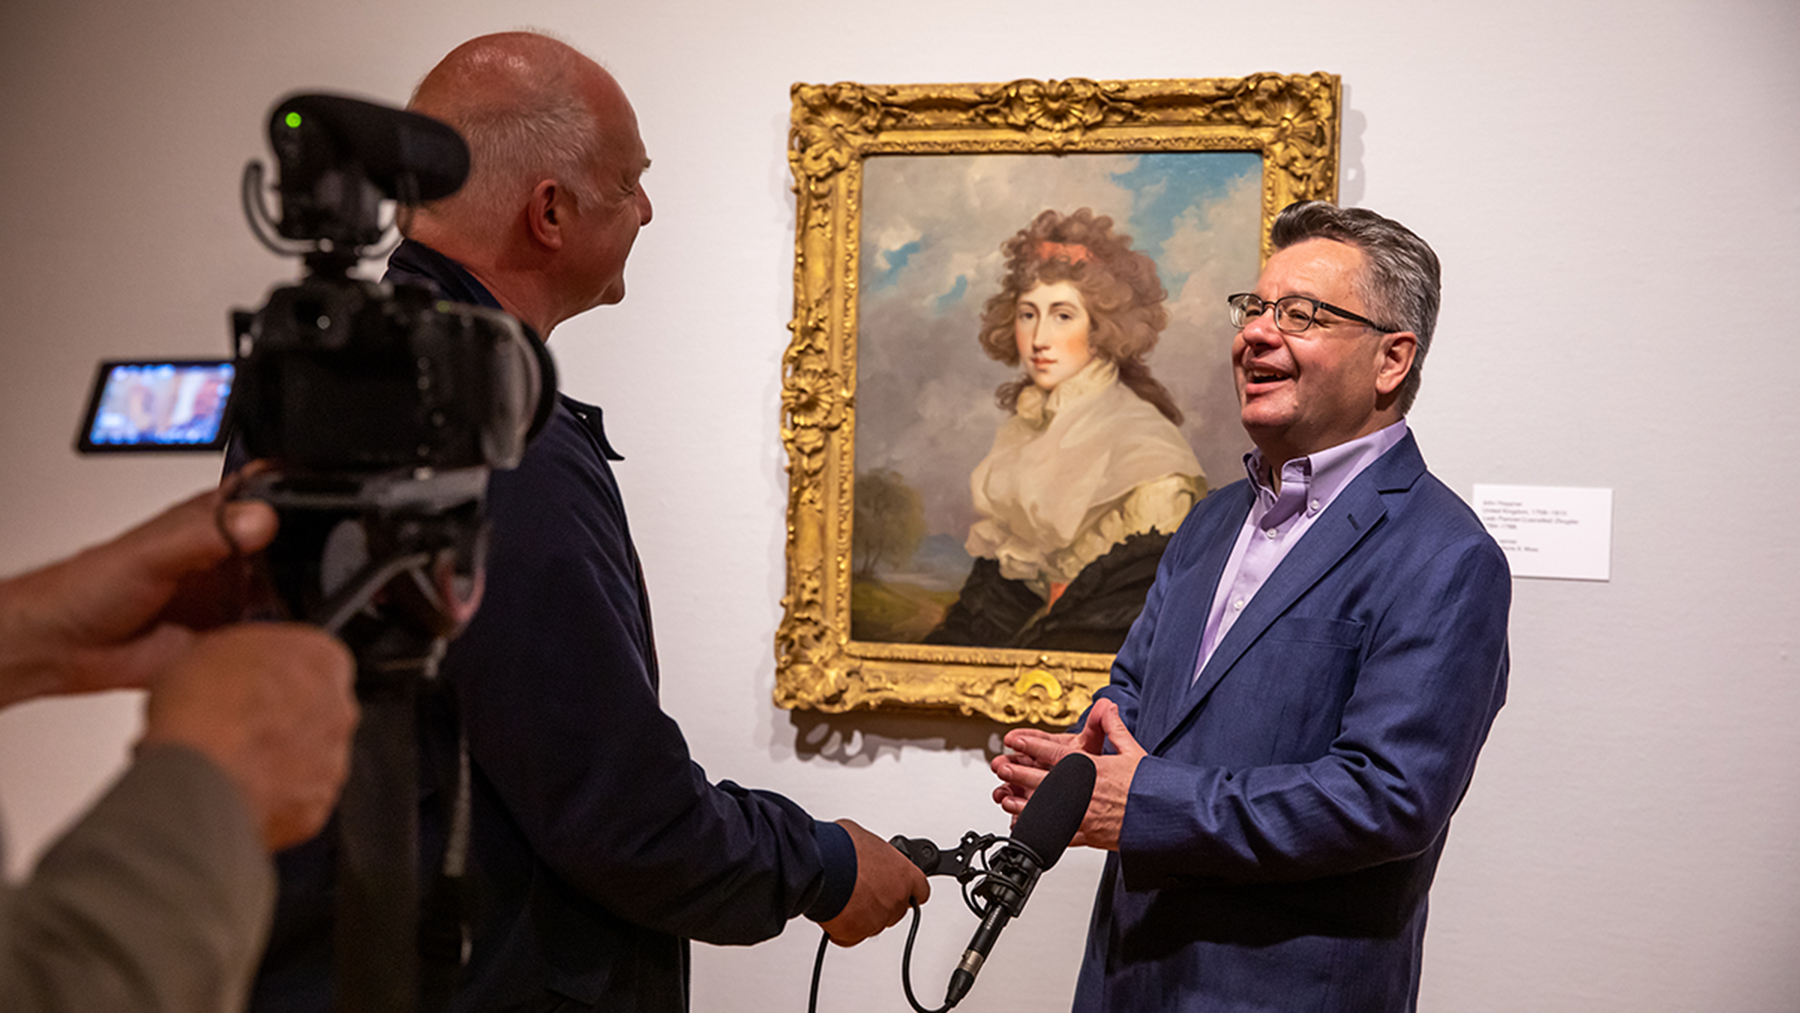 History professor Craig Koslofsky is interviewed beside a painting at the Krannert Art Museum by a German film crew. Photo by Michelle Hassel